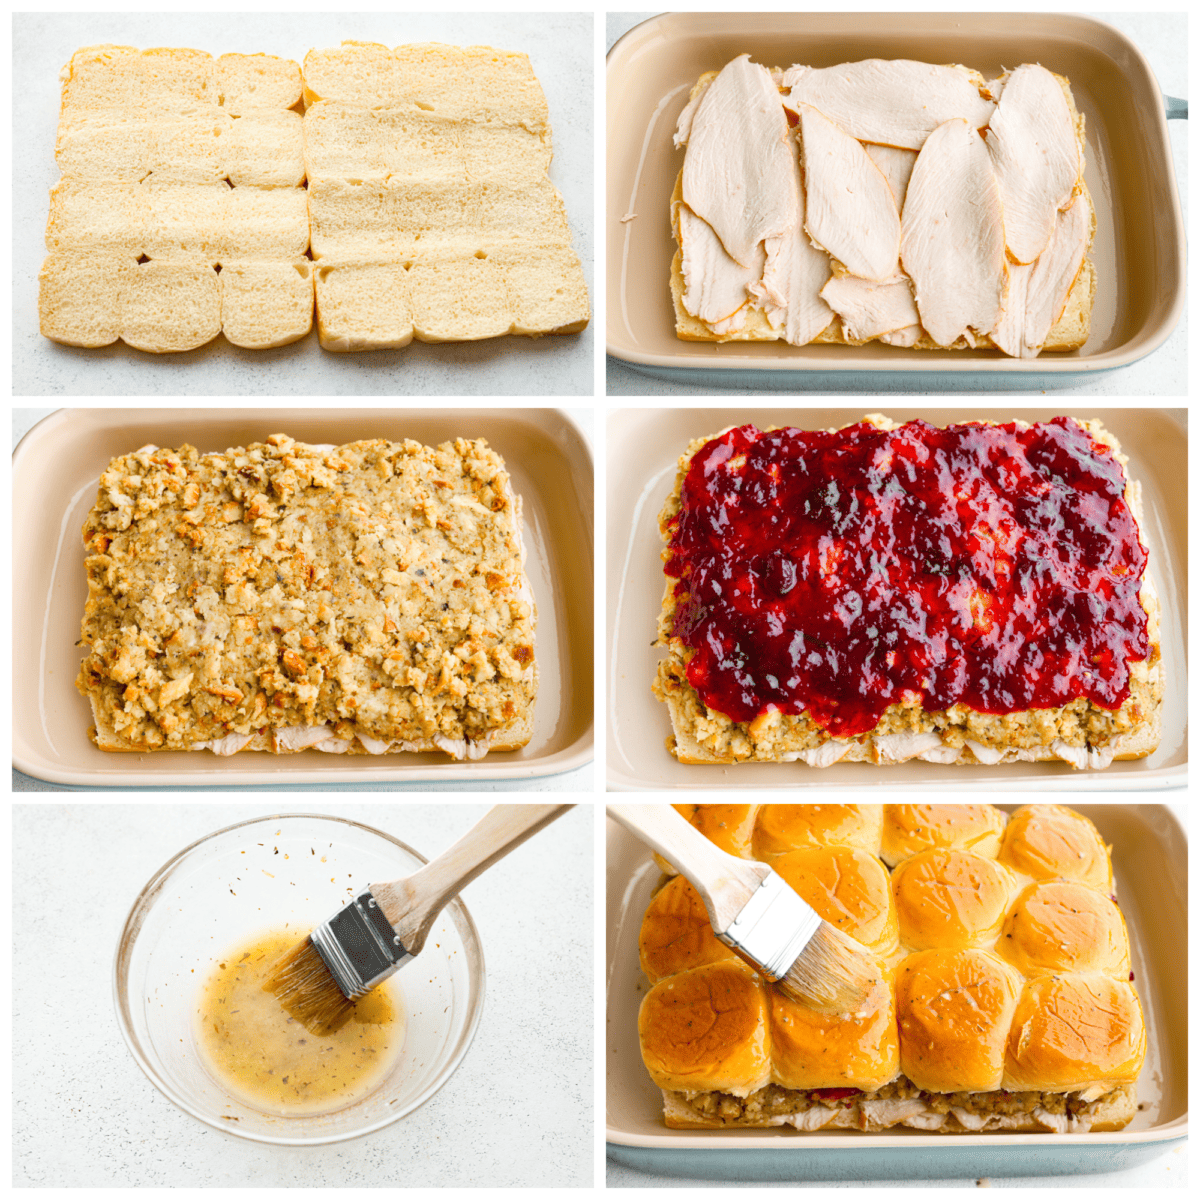 6-photo collage of Hawaiian rolls being layered with sliced turkey, stuffing, cranberry sauce, topped with the other half of the roll and then brushed with butter.